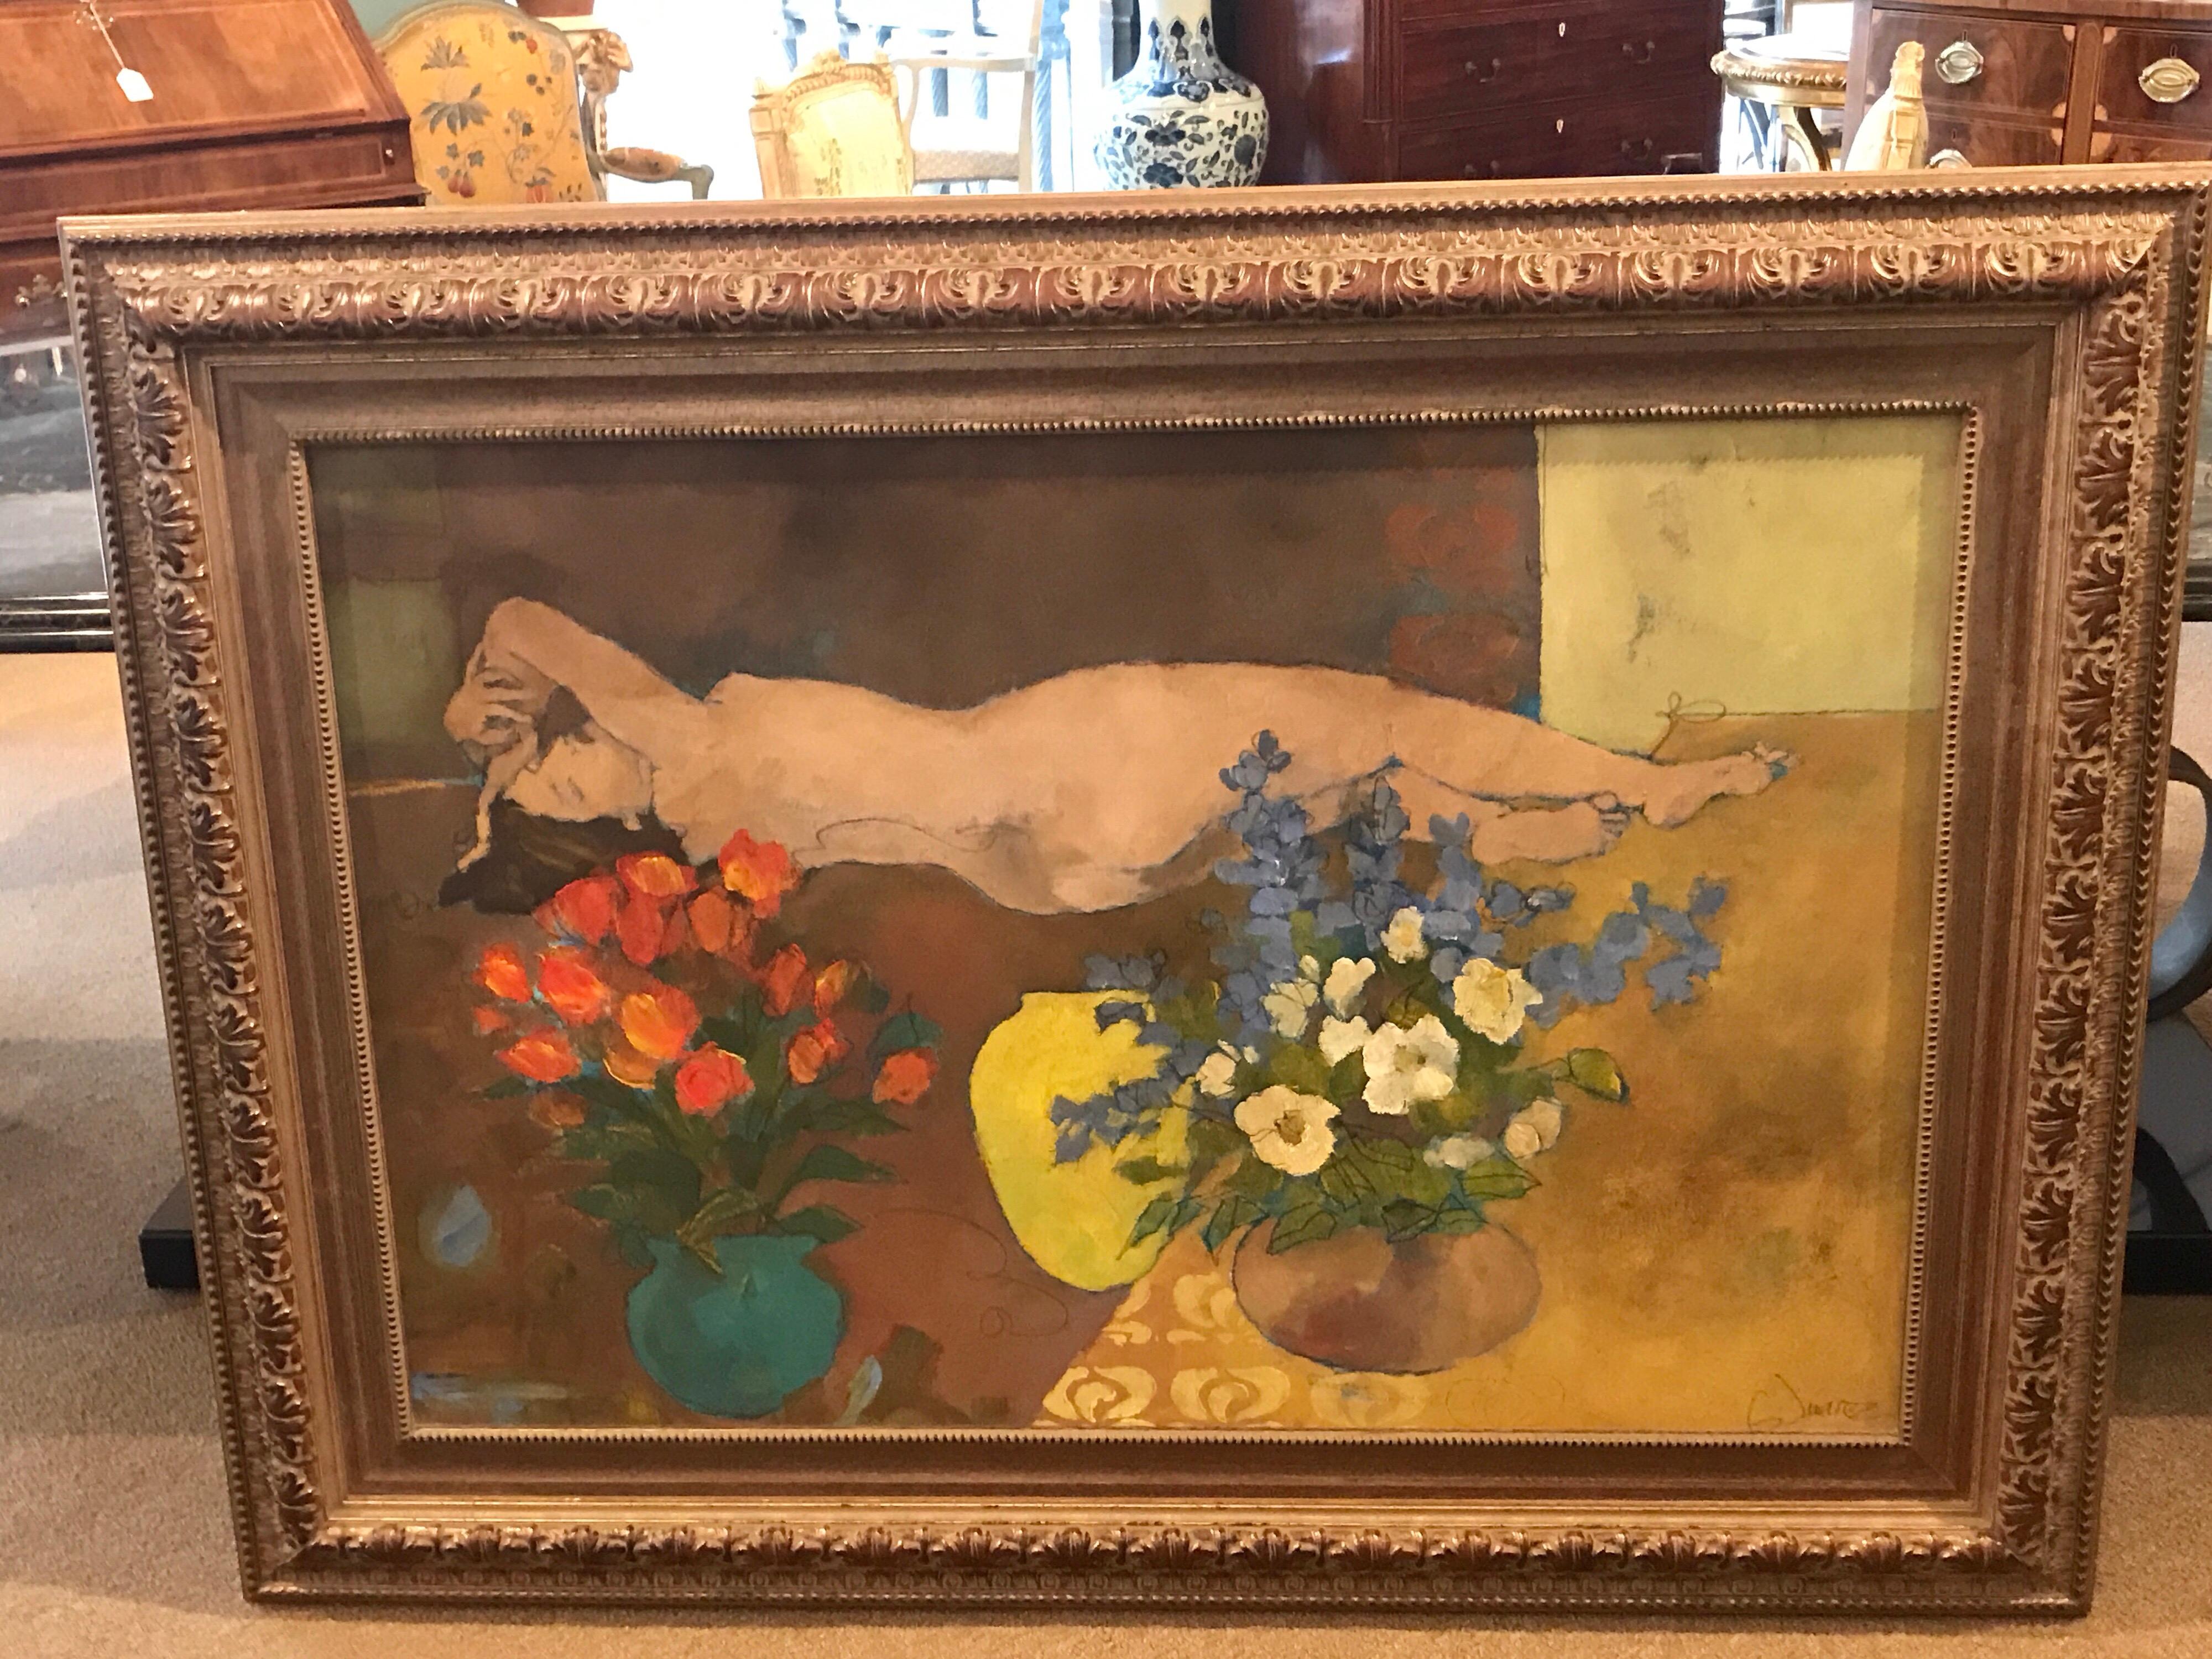 Sleeping Beauty by G. Juarez
Interior with flowers and recumbent female nude
Latin American School
20th century 
Interior with flowers and recumbent female nude
Oil on canvas 44